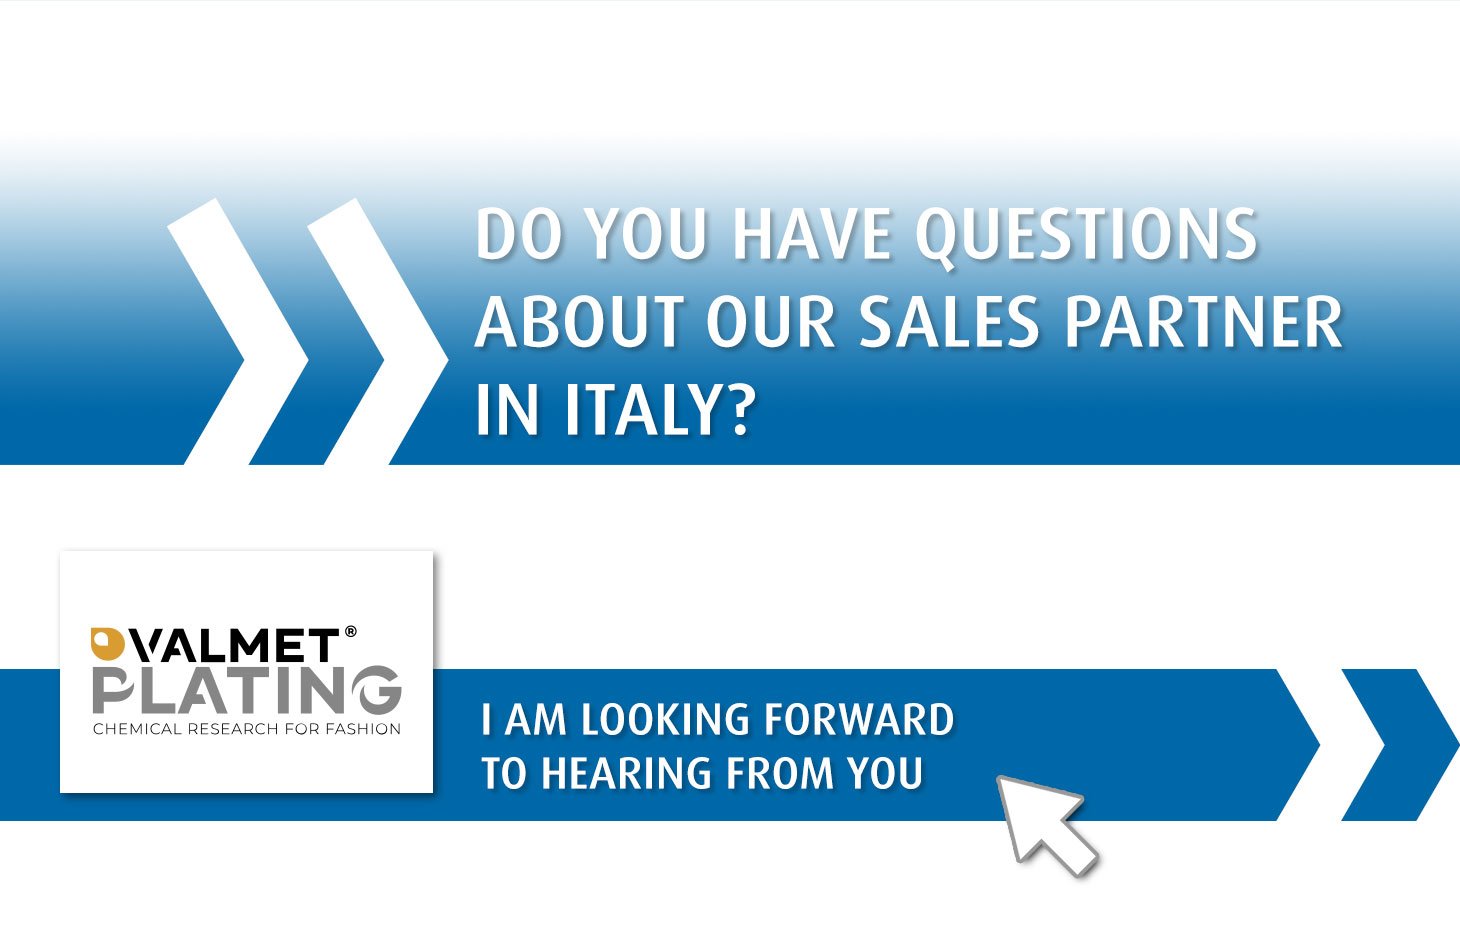 Valmet Plating - Umicore Electroplating distribution partner in Italy - Questions and Answers